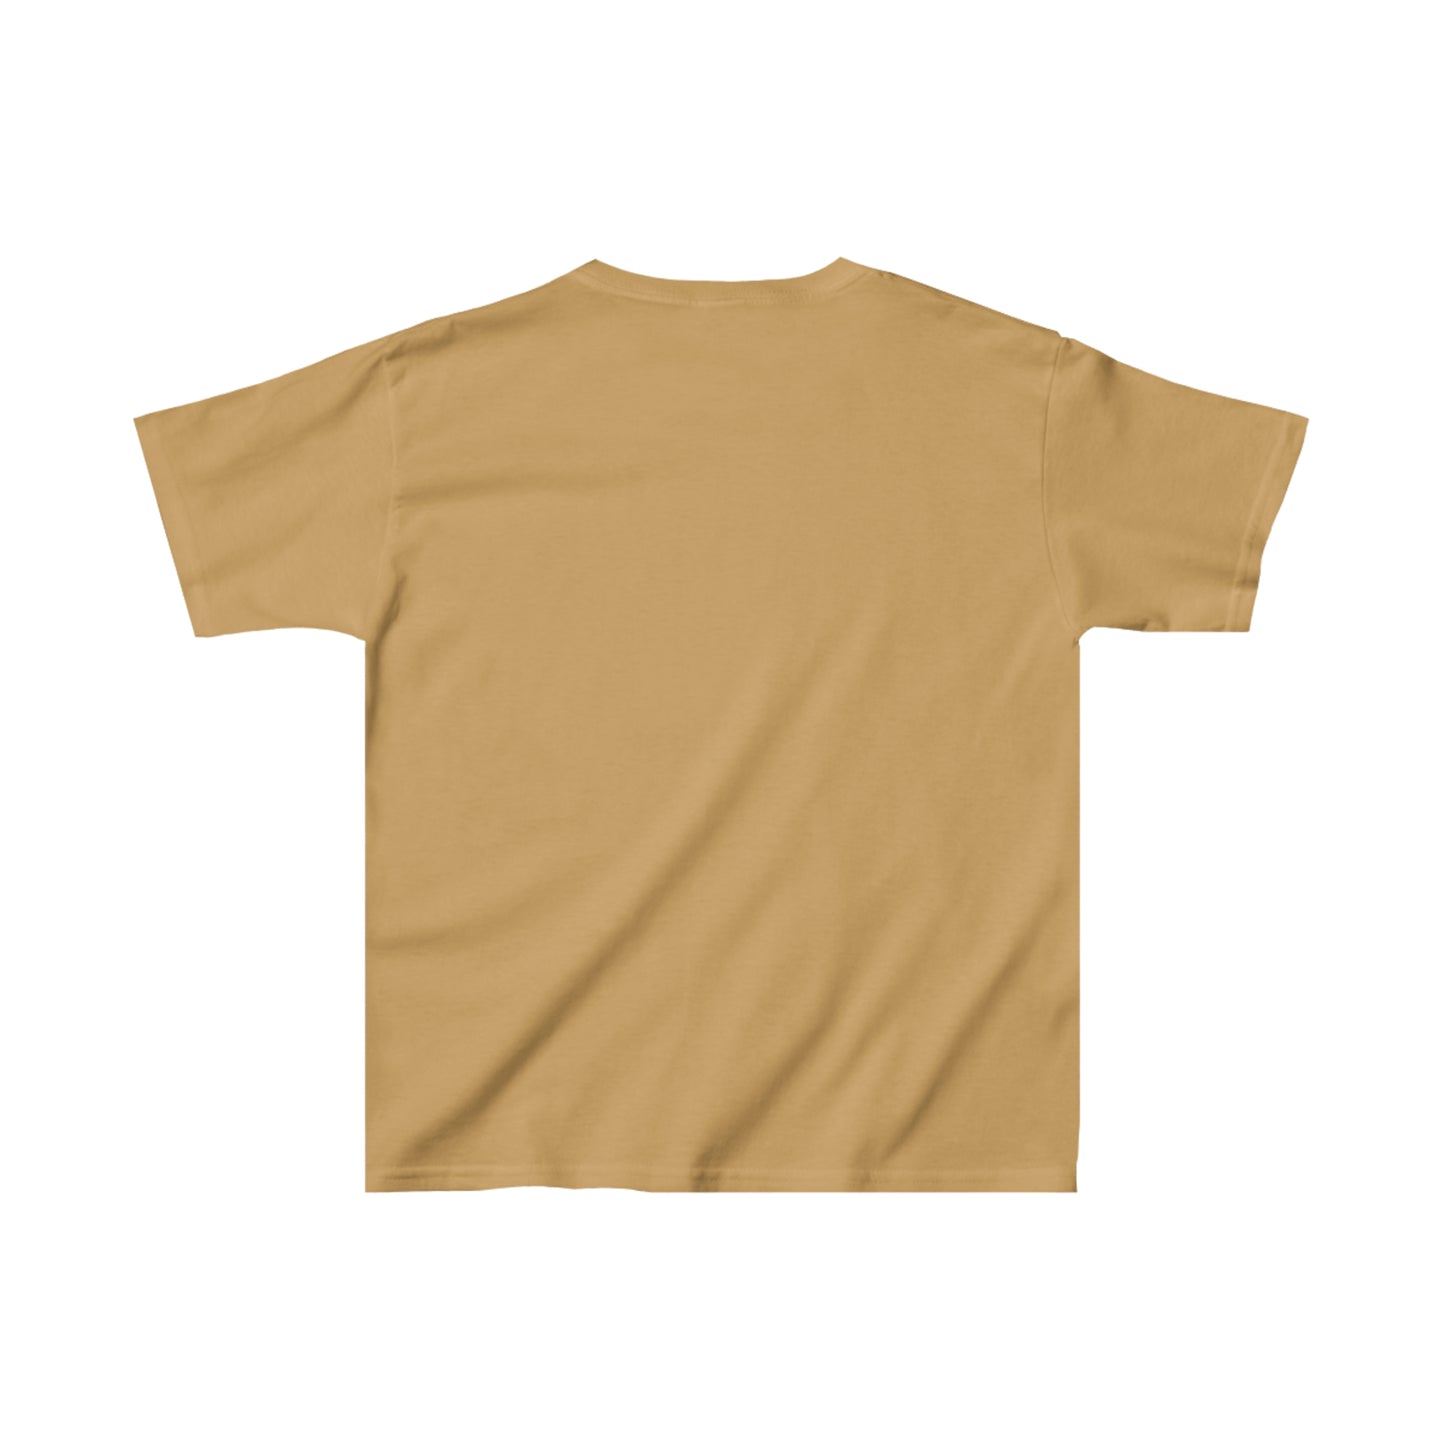 Aroo - Cage to Couch Kids Heavy Cotton™ Tee